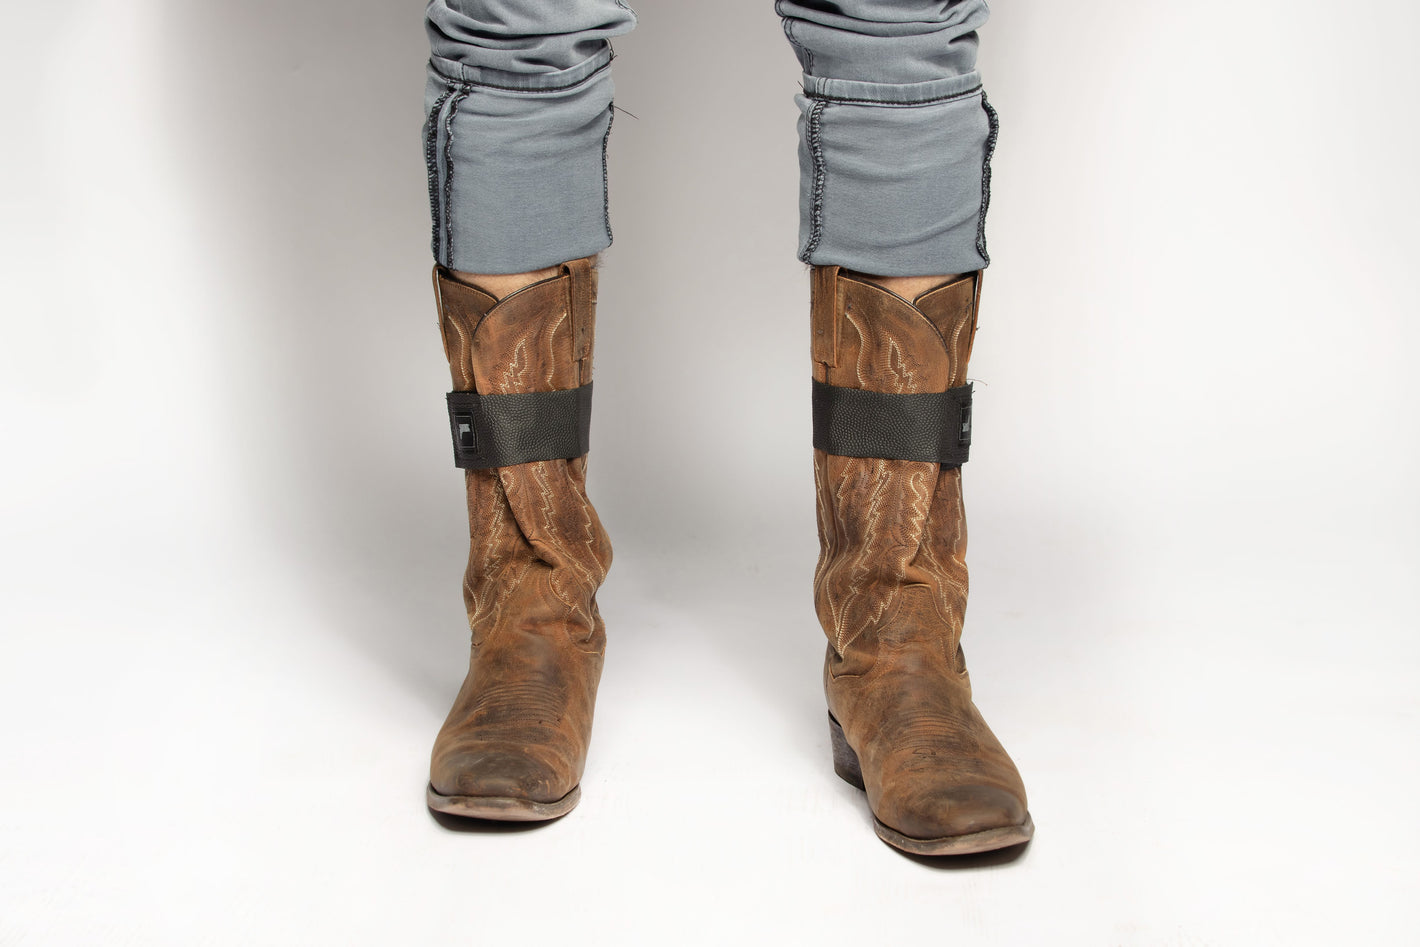 Thoughts on a boot strap for your cowboy boots? I'm kinda torn here I wear  cowboy cut but I also would like to wear a slimmer fit without that flare  lol 